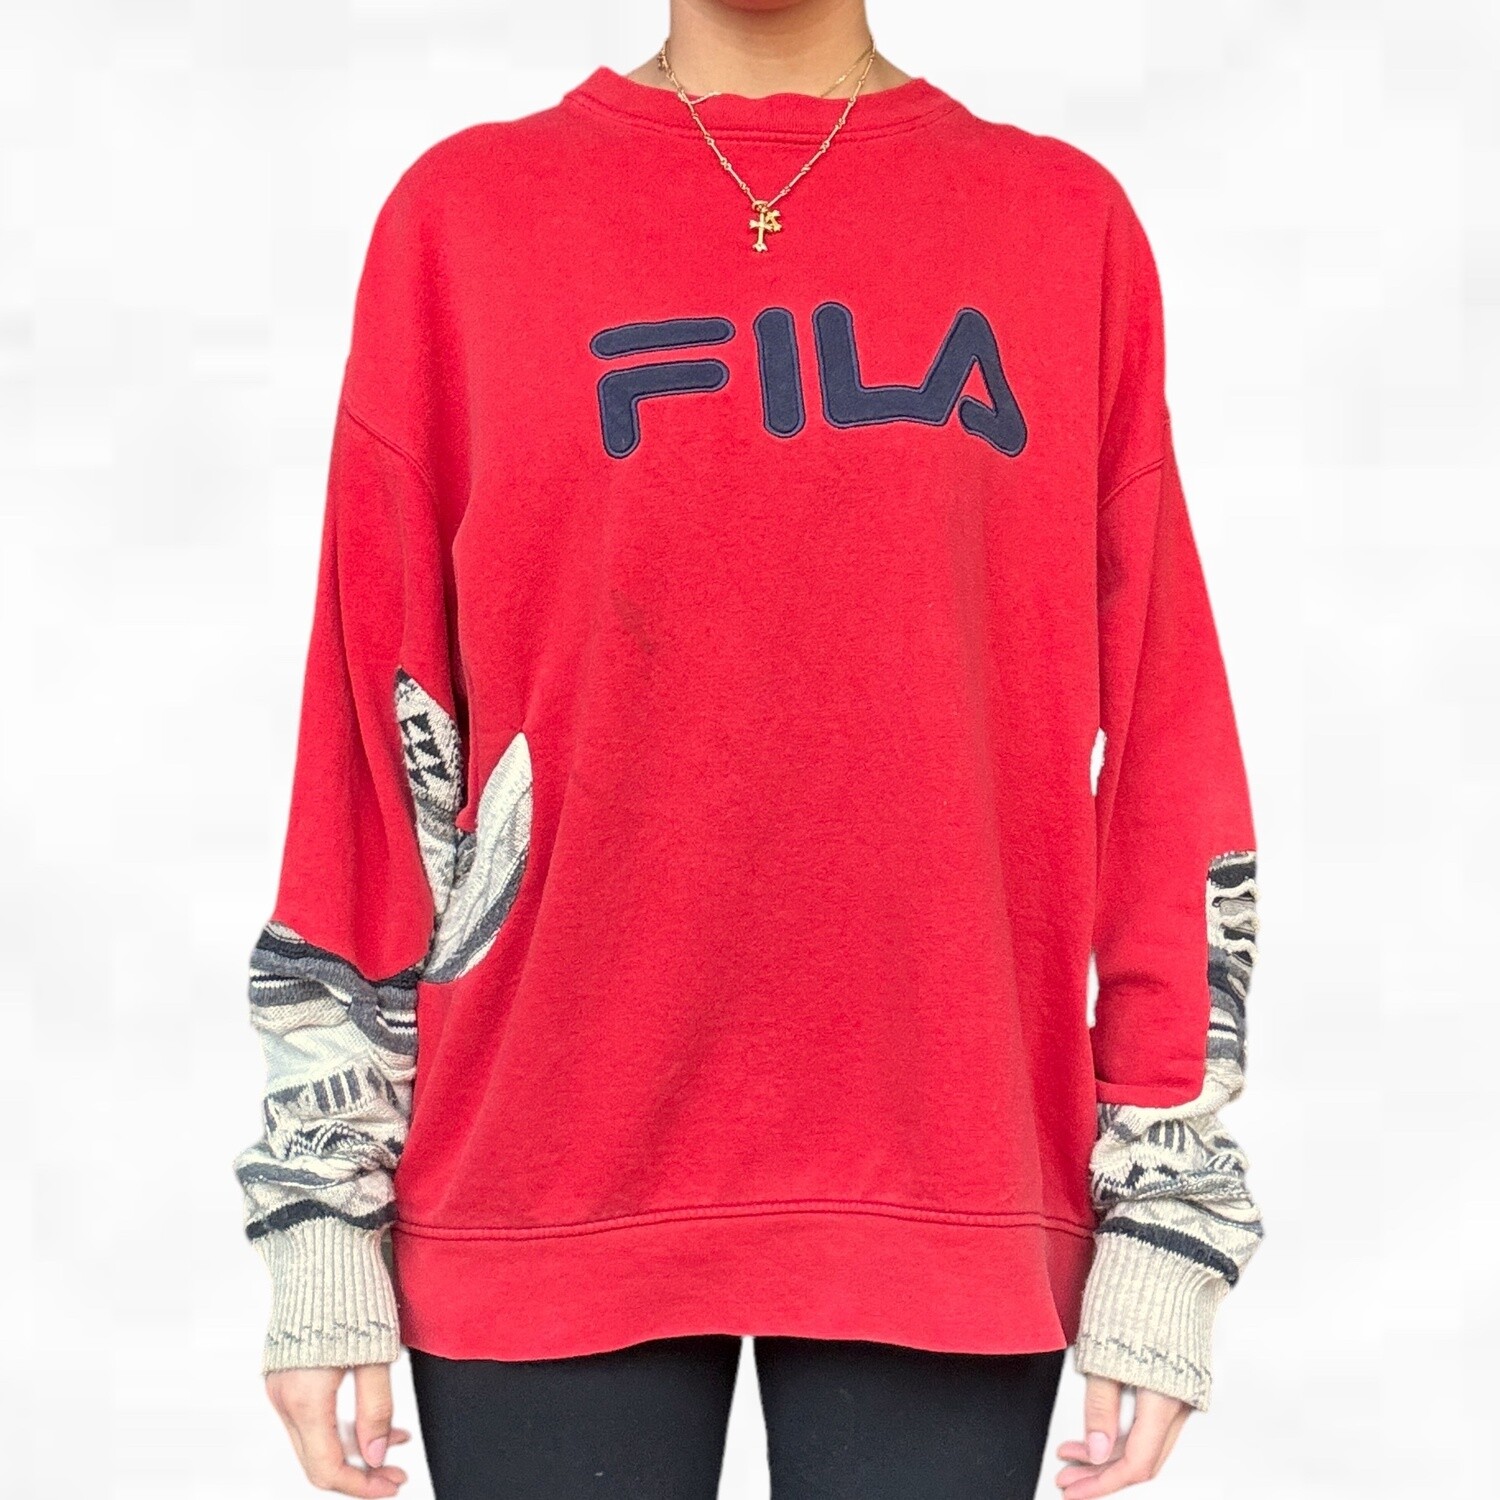 Fila Rework Sweater, Size: XL, Color: Red, Style: Sweater